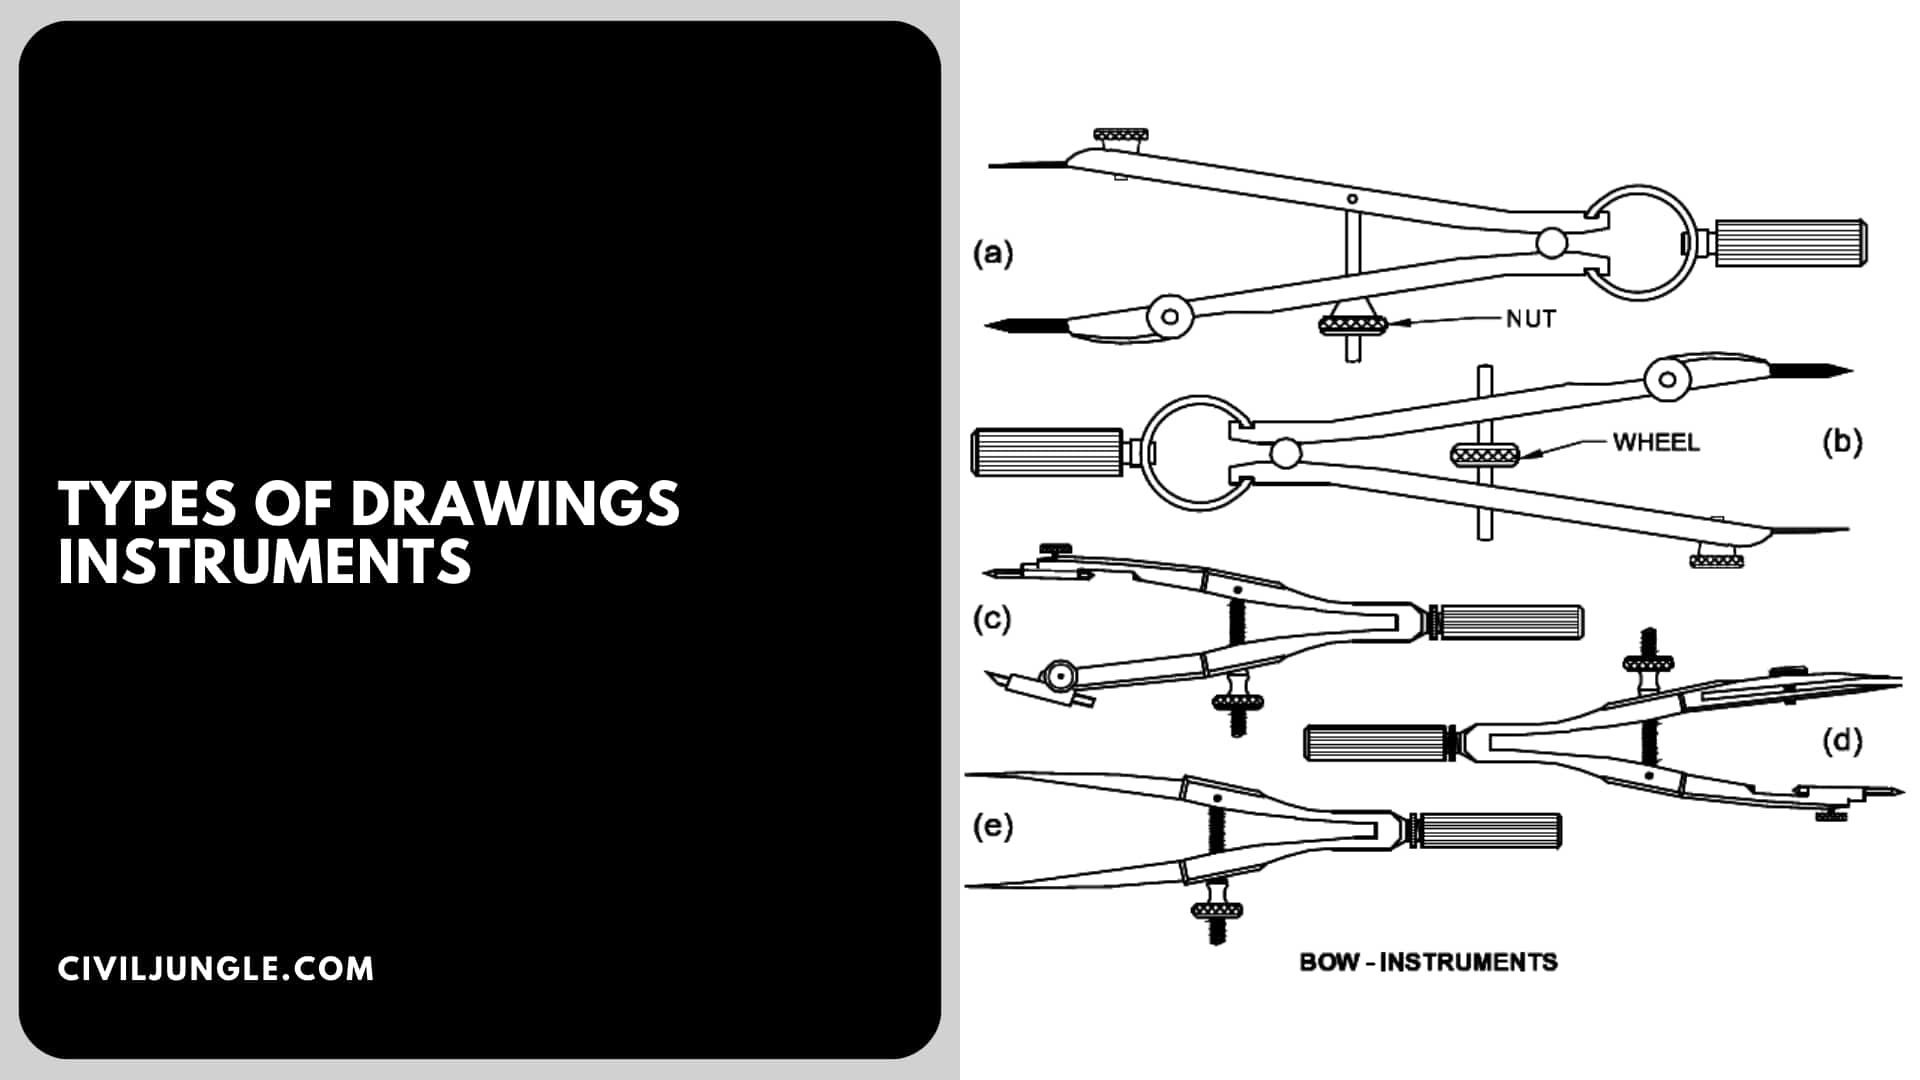 Engineering Drawing Equipment Stock Image - Image of pencil, graphic:  19335549